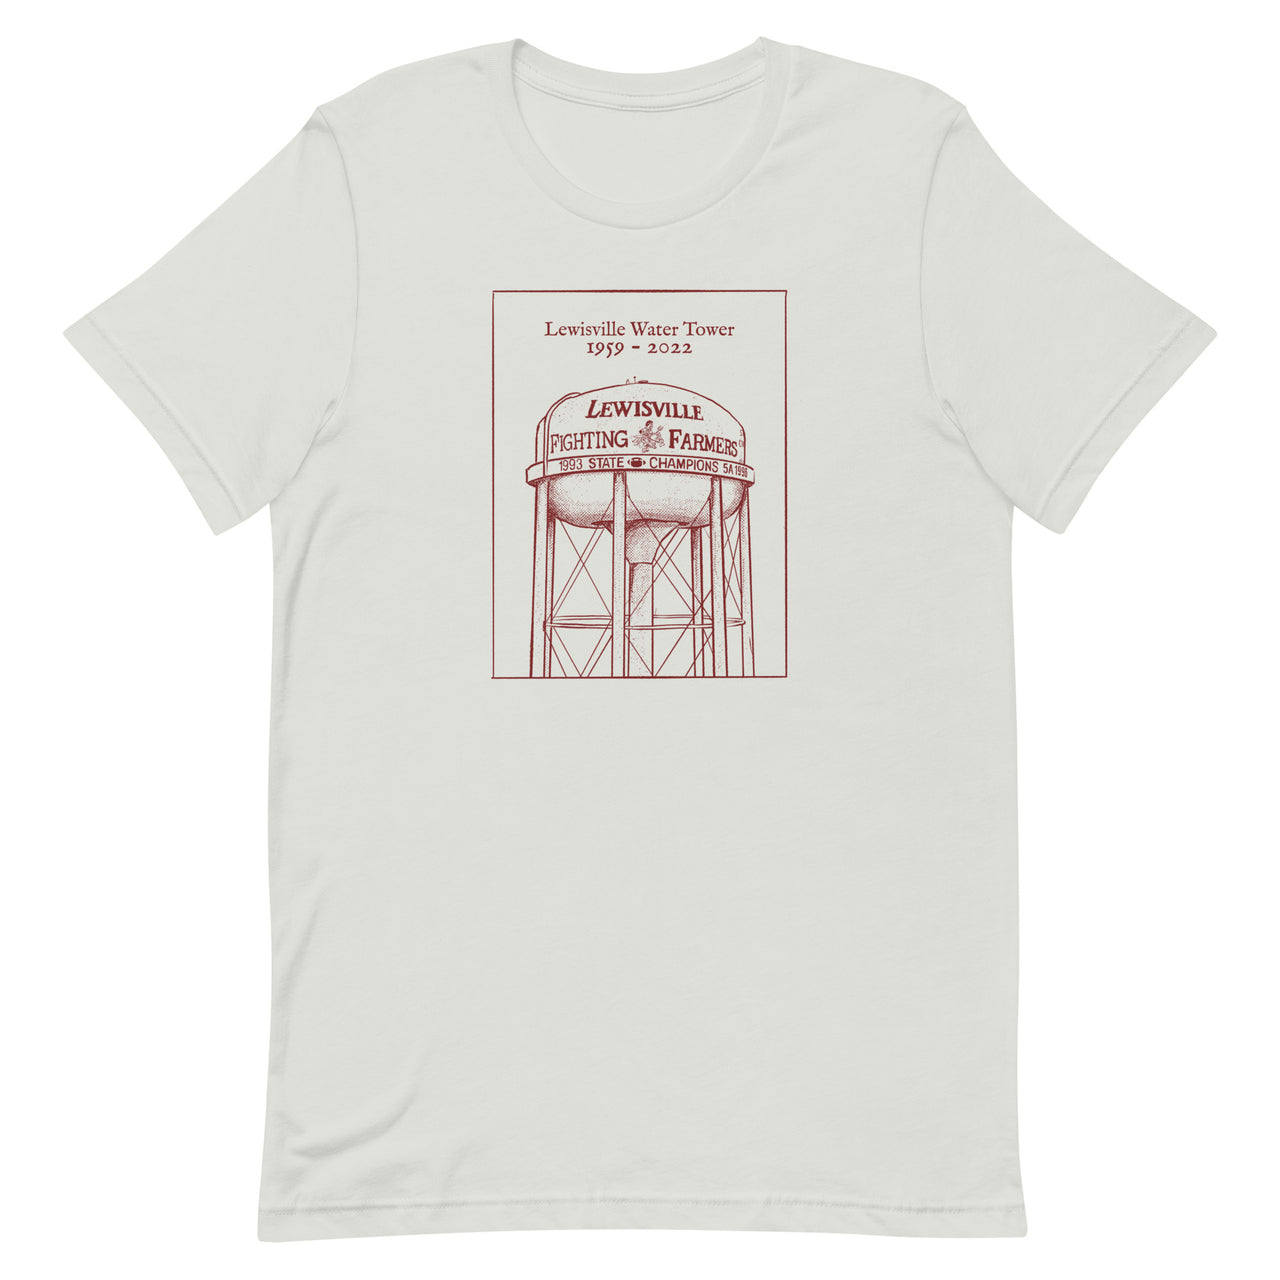 Lewisville Water Tower T-Shirt